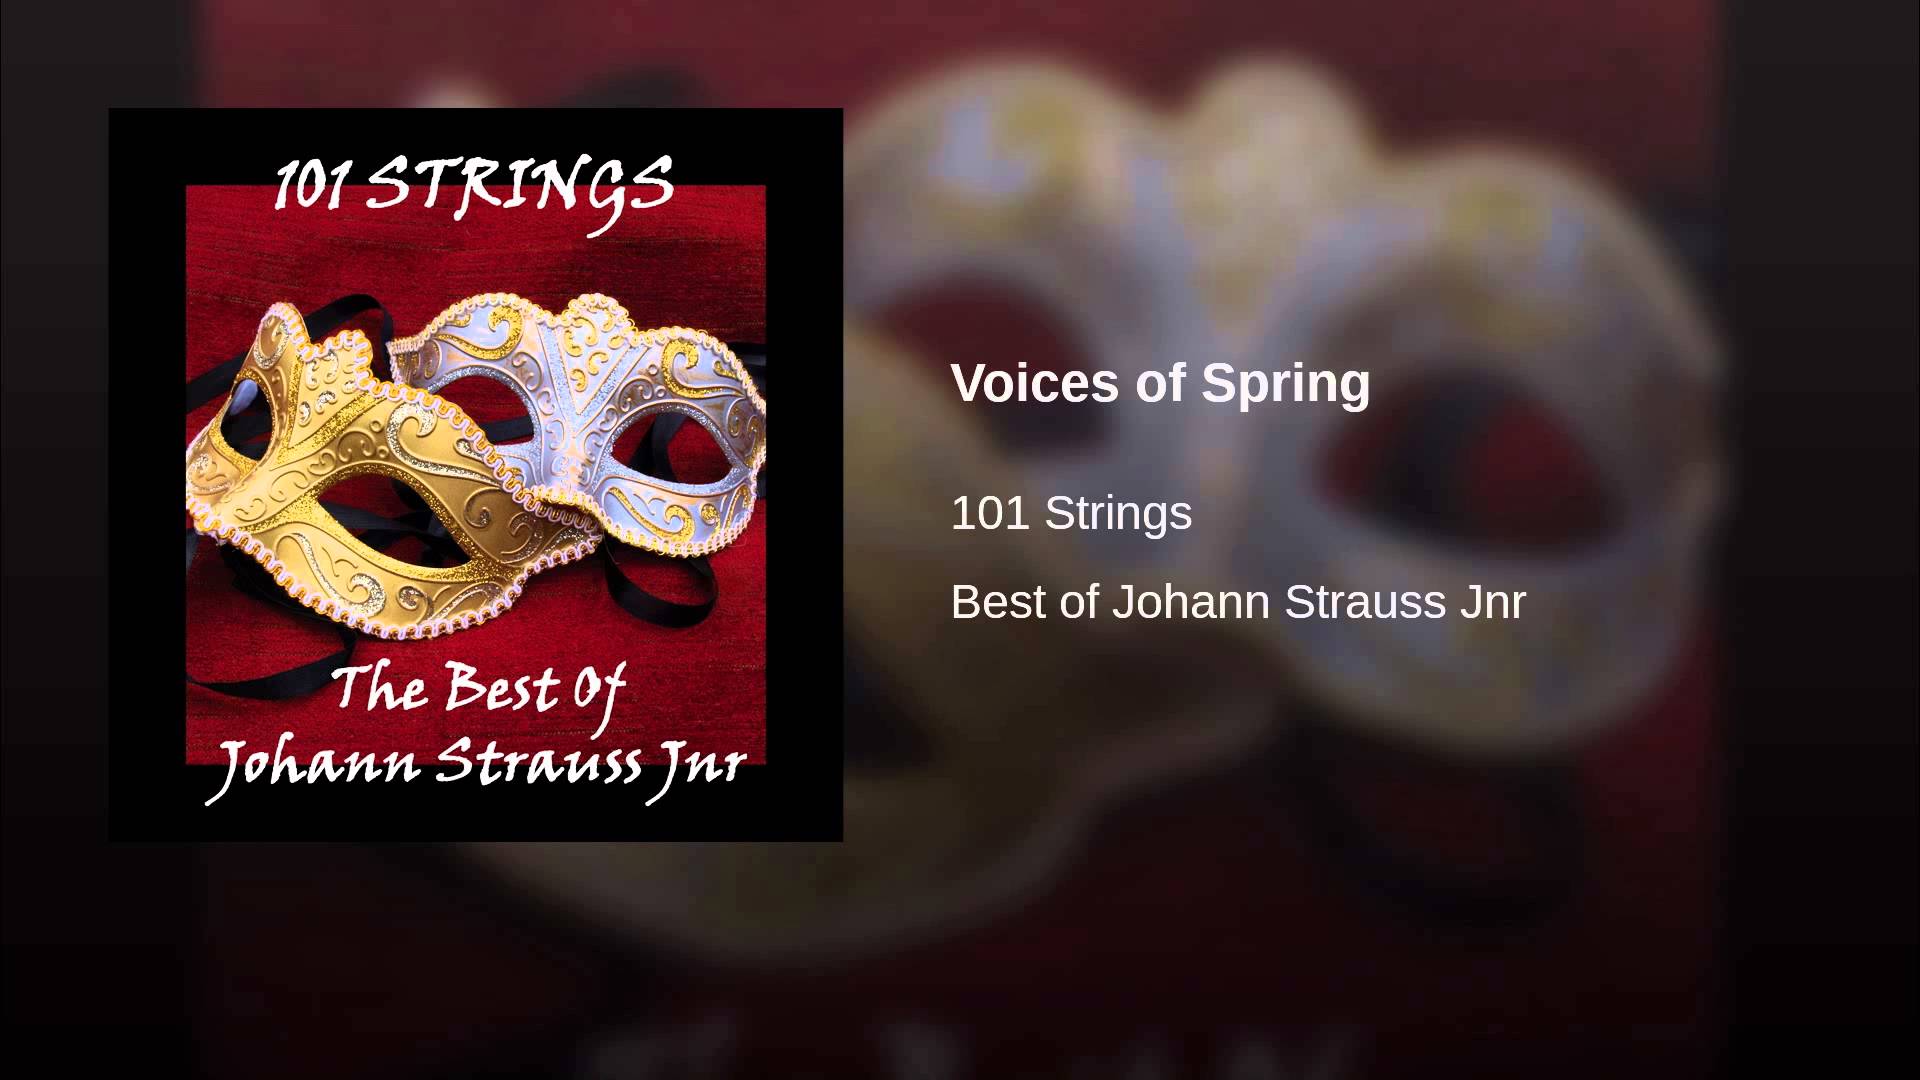 Voices of Spring - YouTube